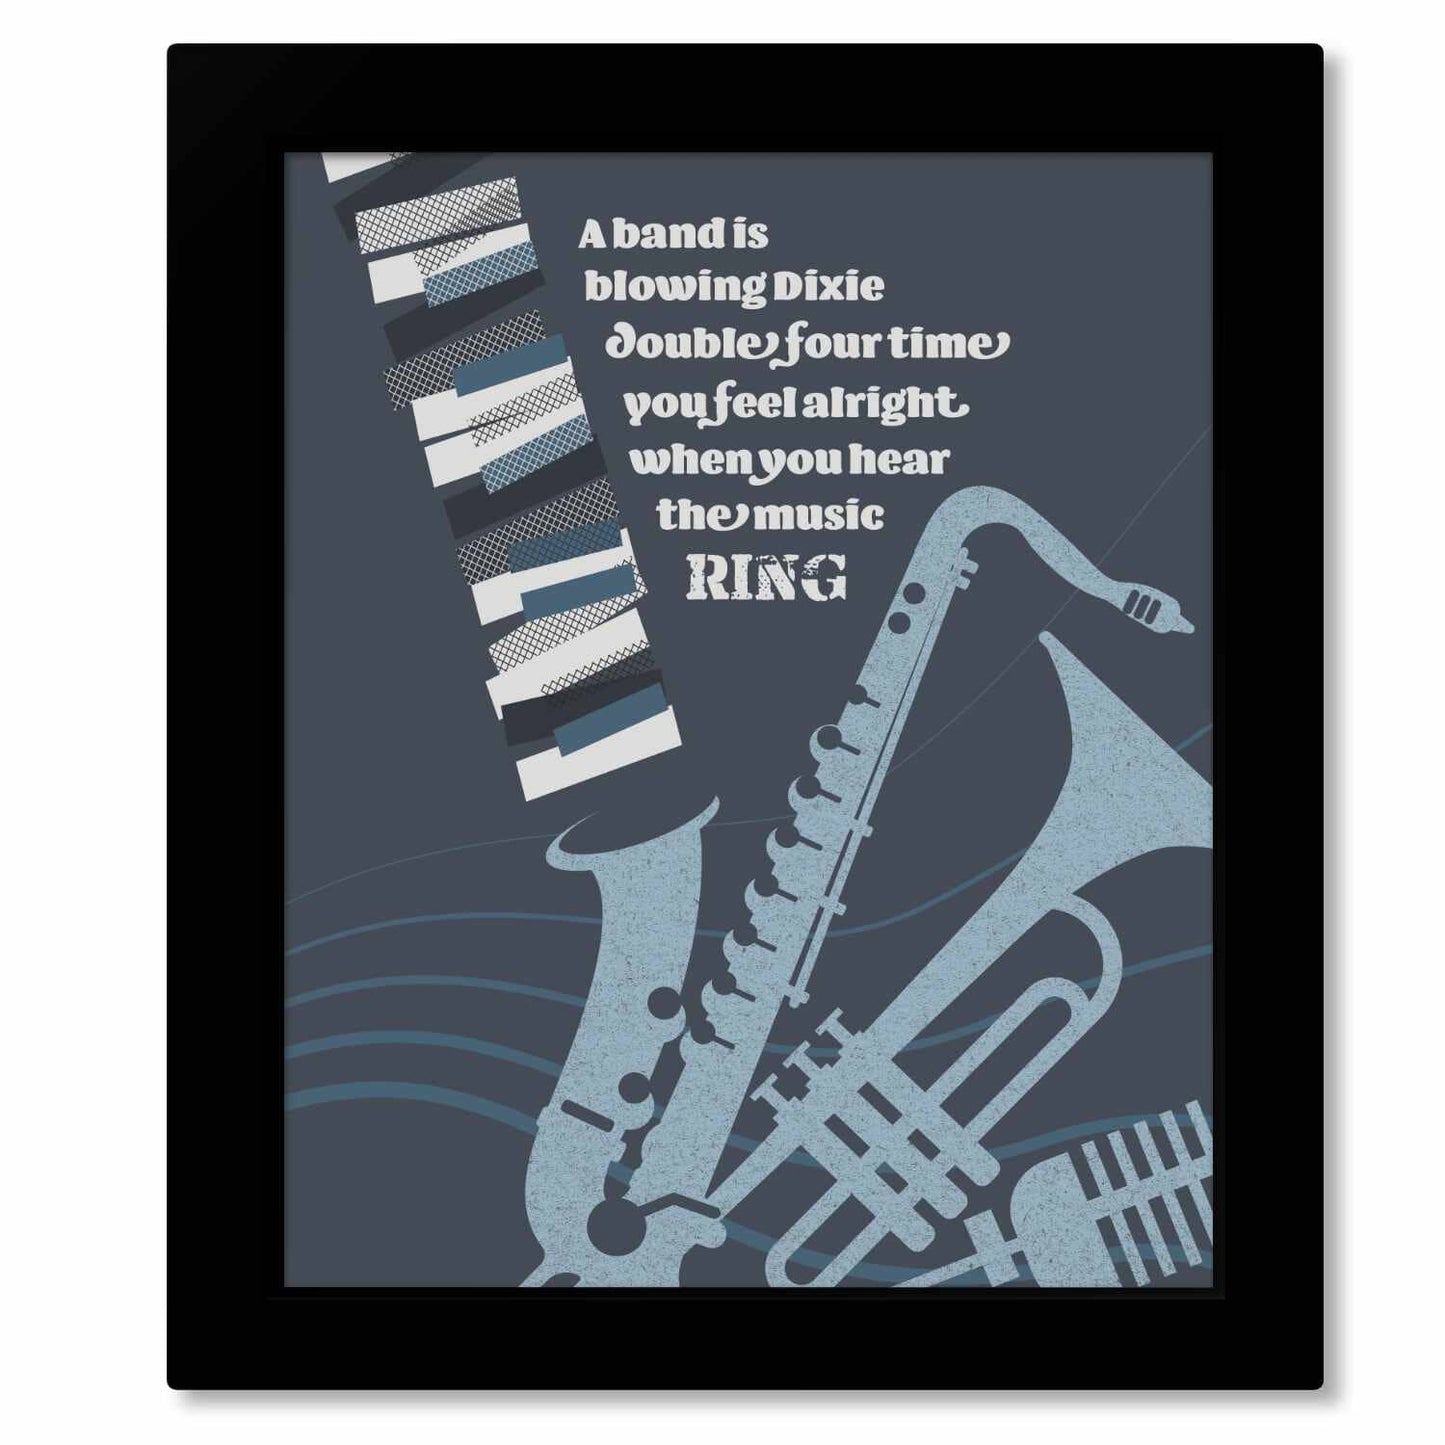 Sultans of Swing by Dire Straits - 70s Song Lyrics Art Print Song Lyrics Art Song Lyrics Art 8x10 Framed Print (without Mat) 